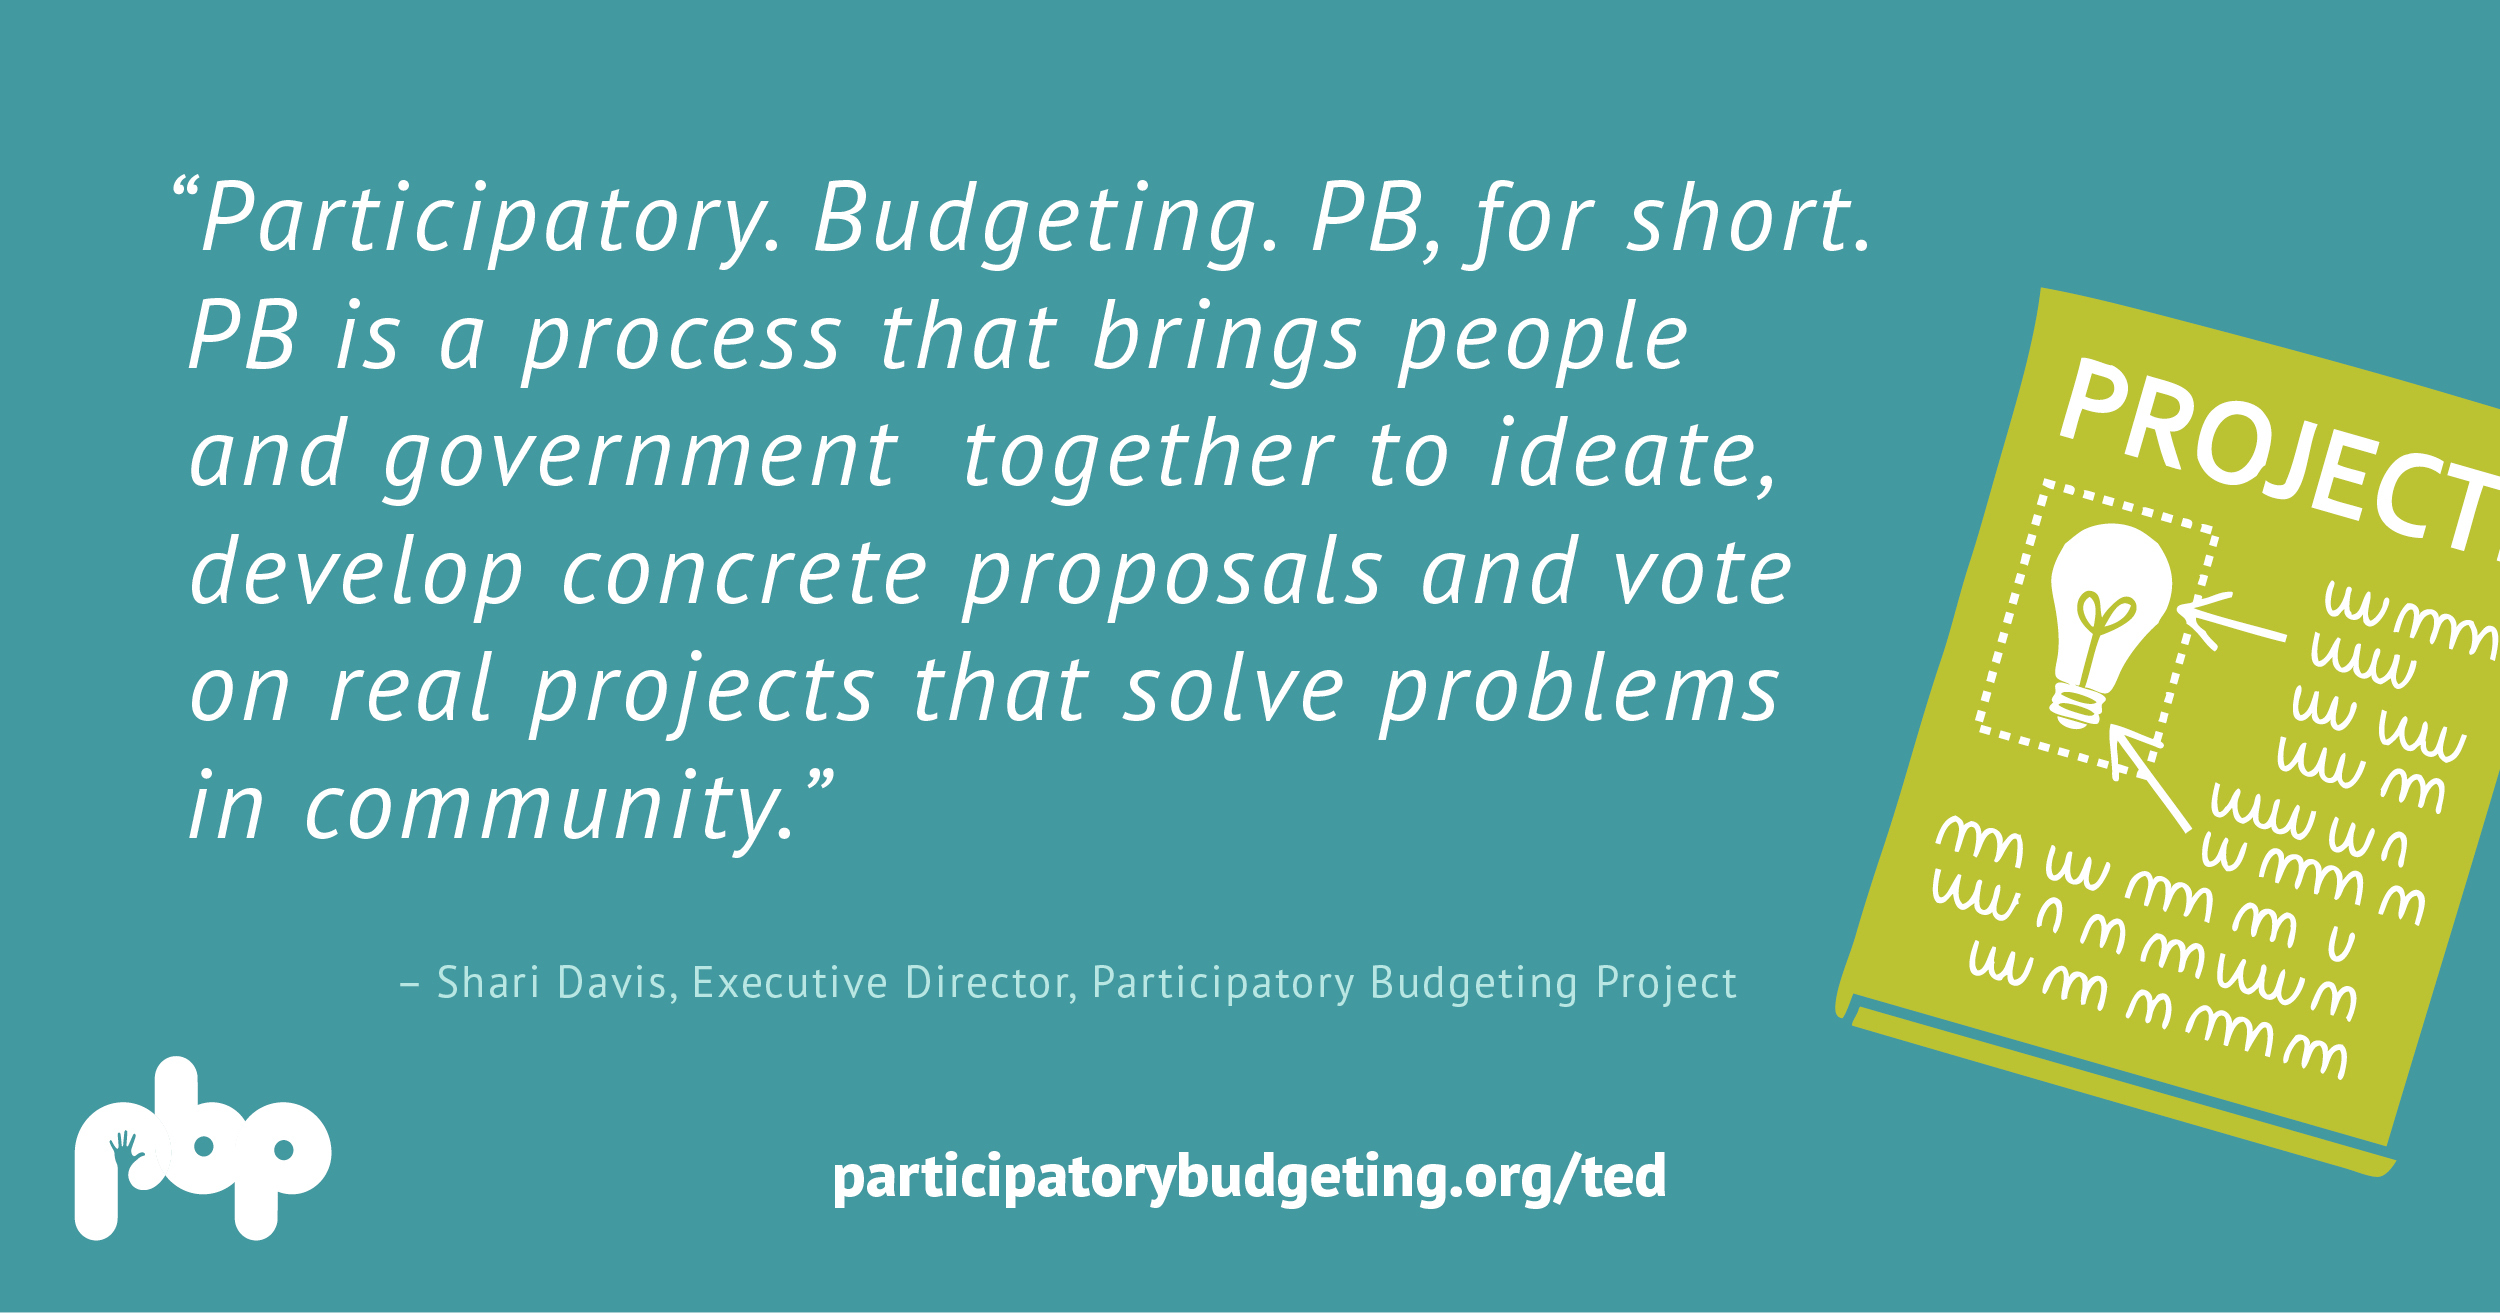 Participatory. Budgeting. PB, for short. PB is a process that brings people and government together to ideate, develop concrete proposals and vote on real projects that solve projects in community. - Shari Davis